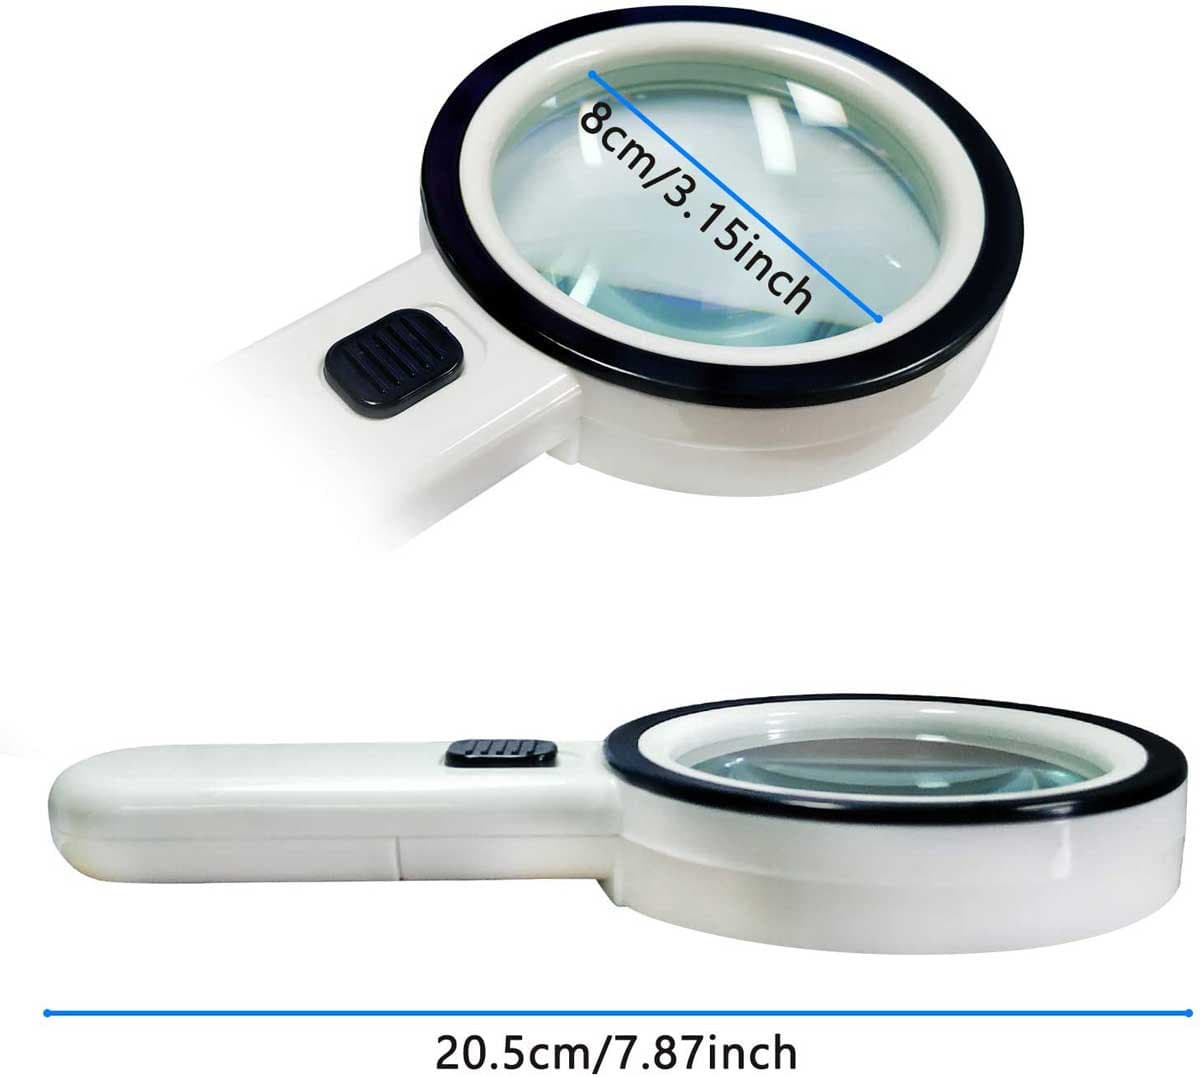 Handheld Usb Magnifying Glass With 8 LED Lights And Optical Lens 5X, 10X,  15X Magnification For Reading And Repair From Nan07, $13.23